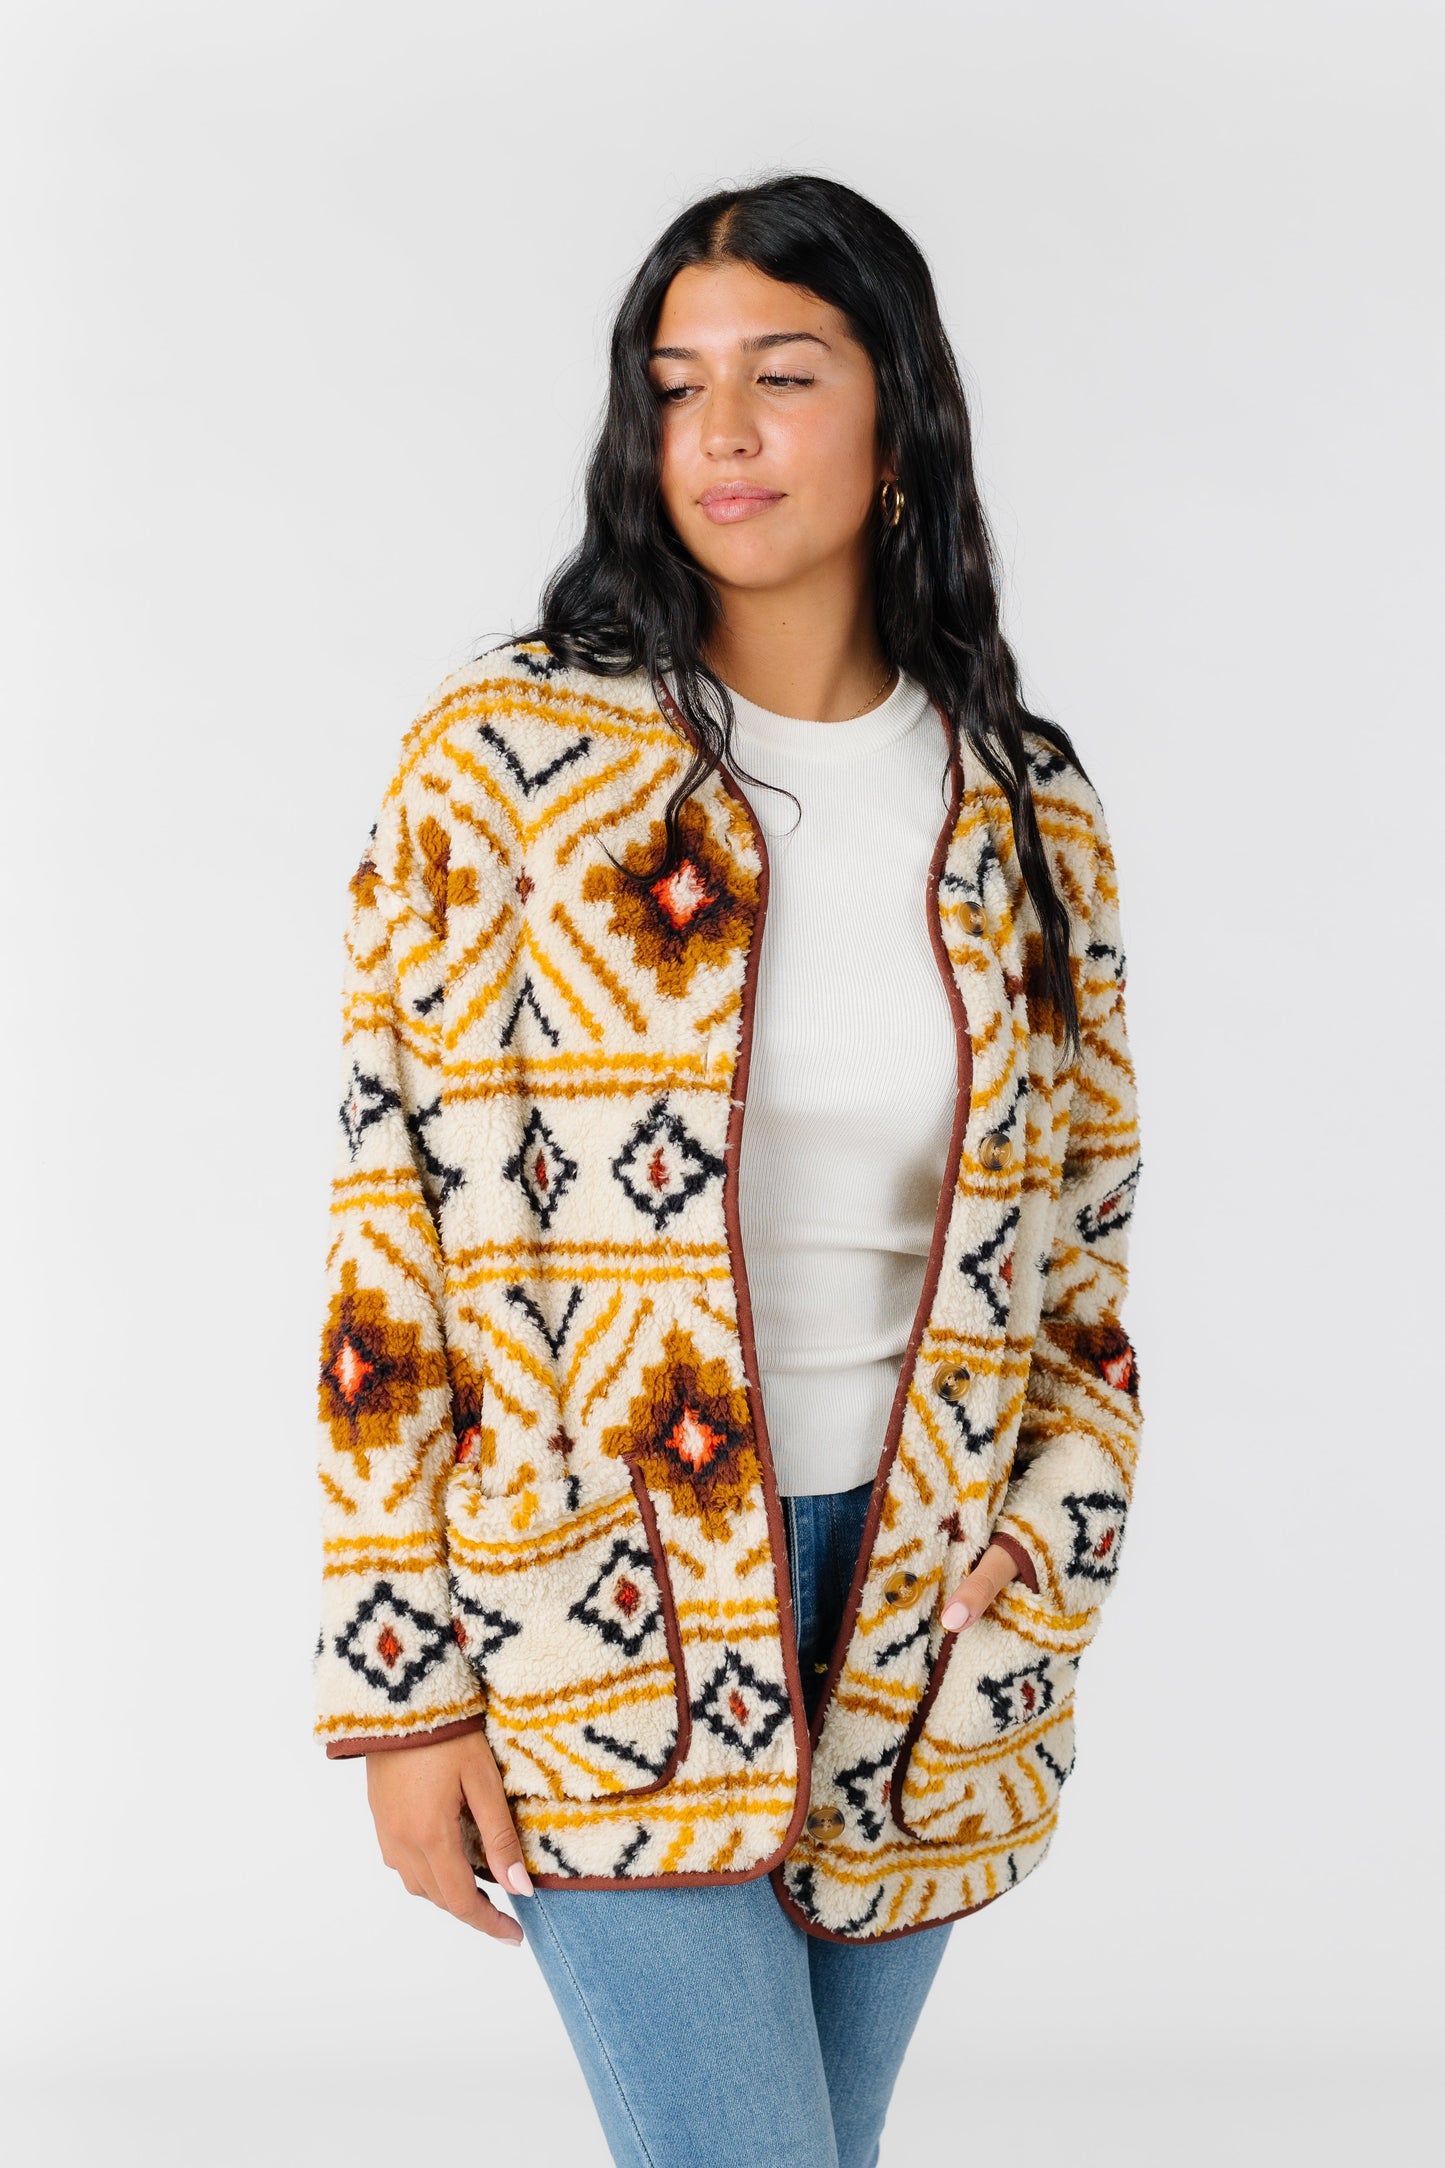 Cozy Fireside Jacket Called Billabong Surf to Button – Up